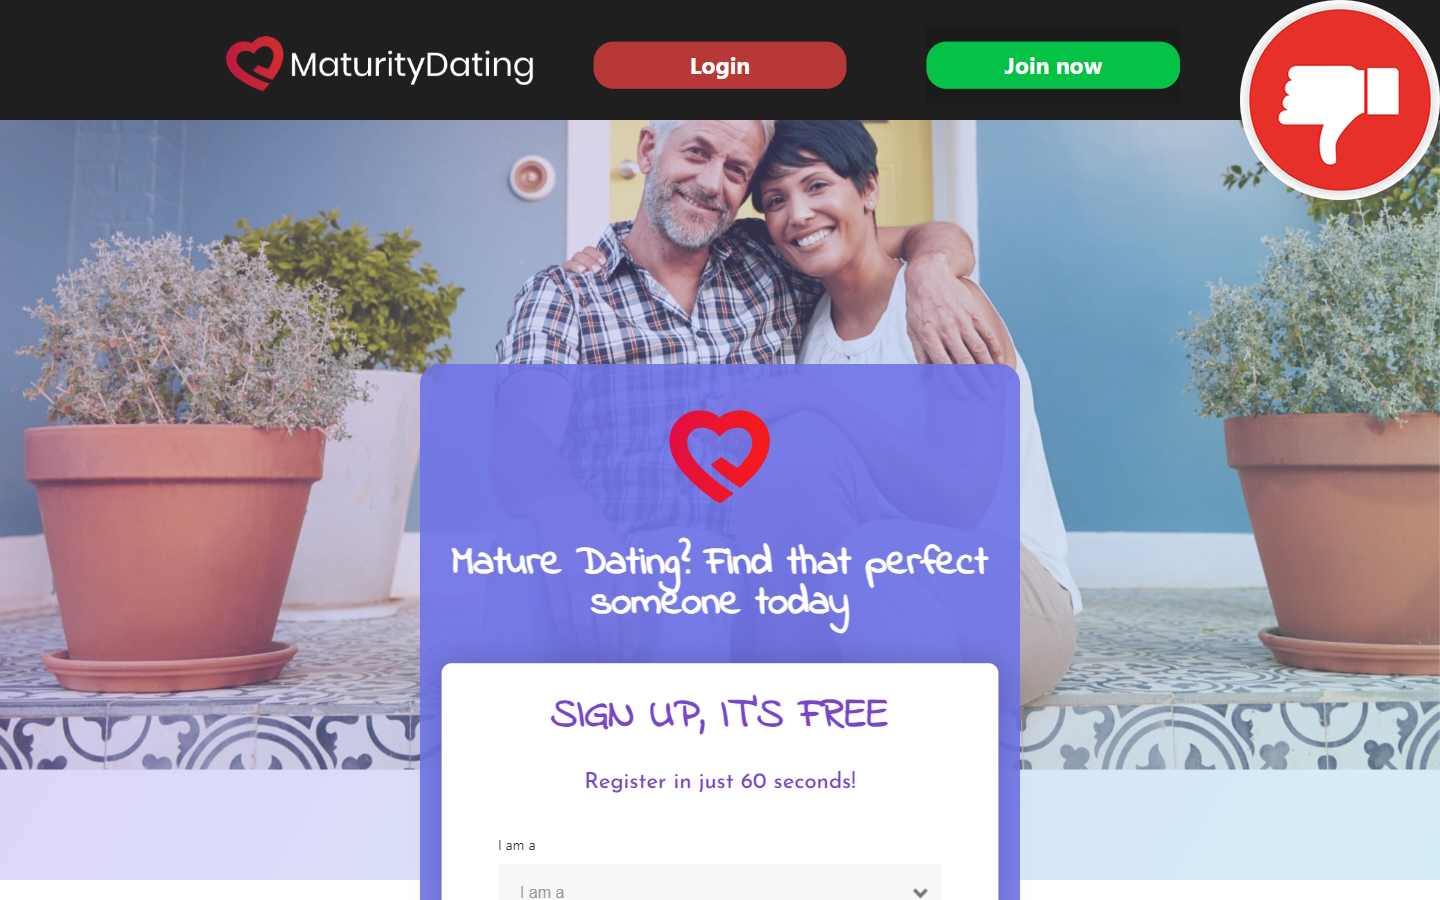 Review MaturityDating.co.uk Scam